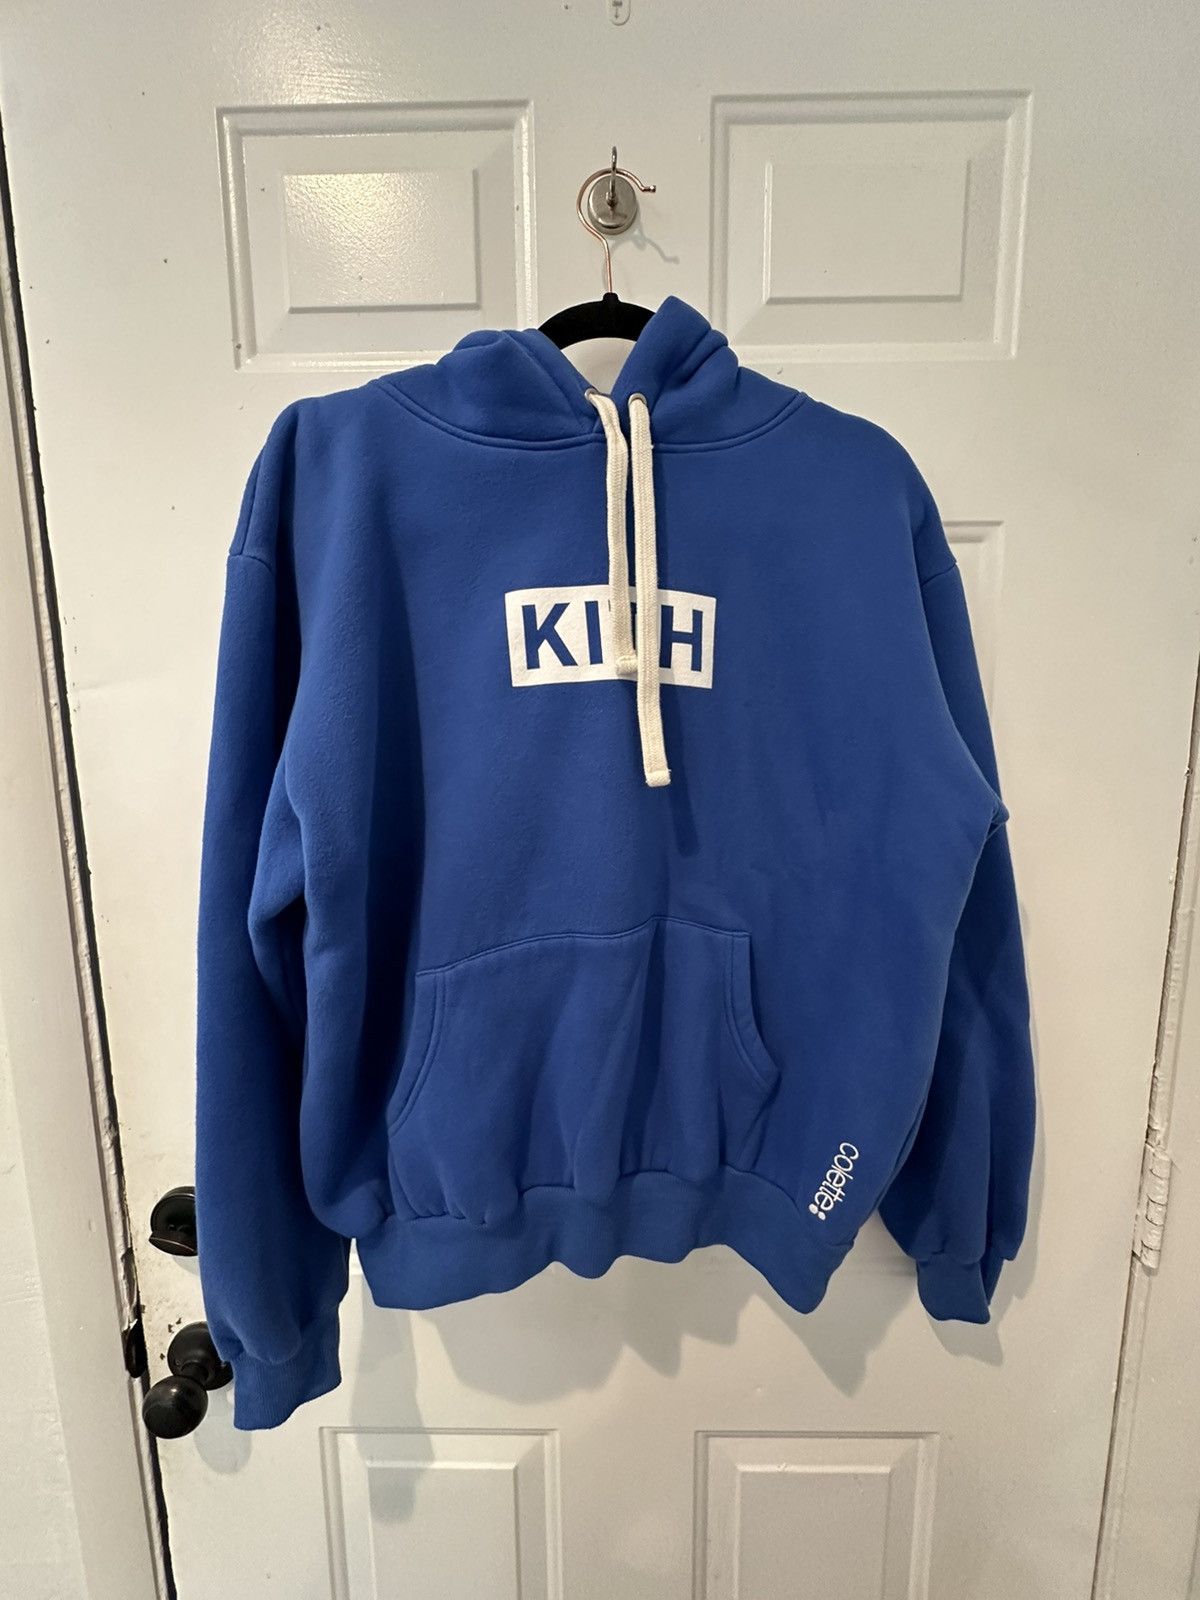 Kith Kith x Colette Hoodie | Grailed